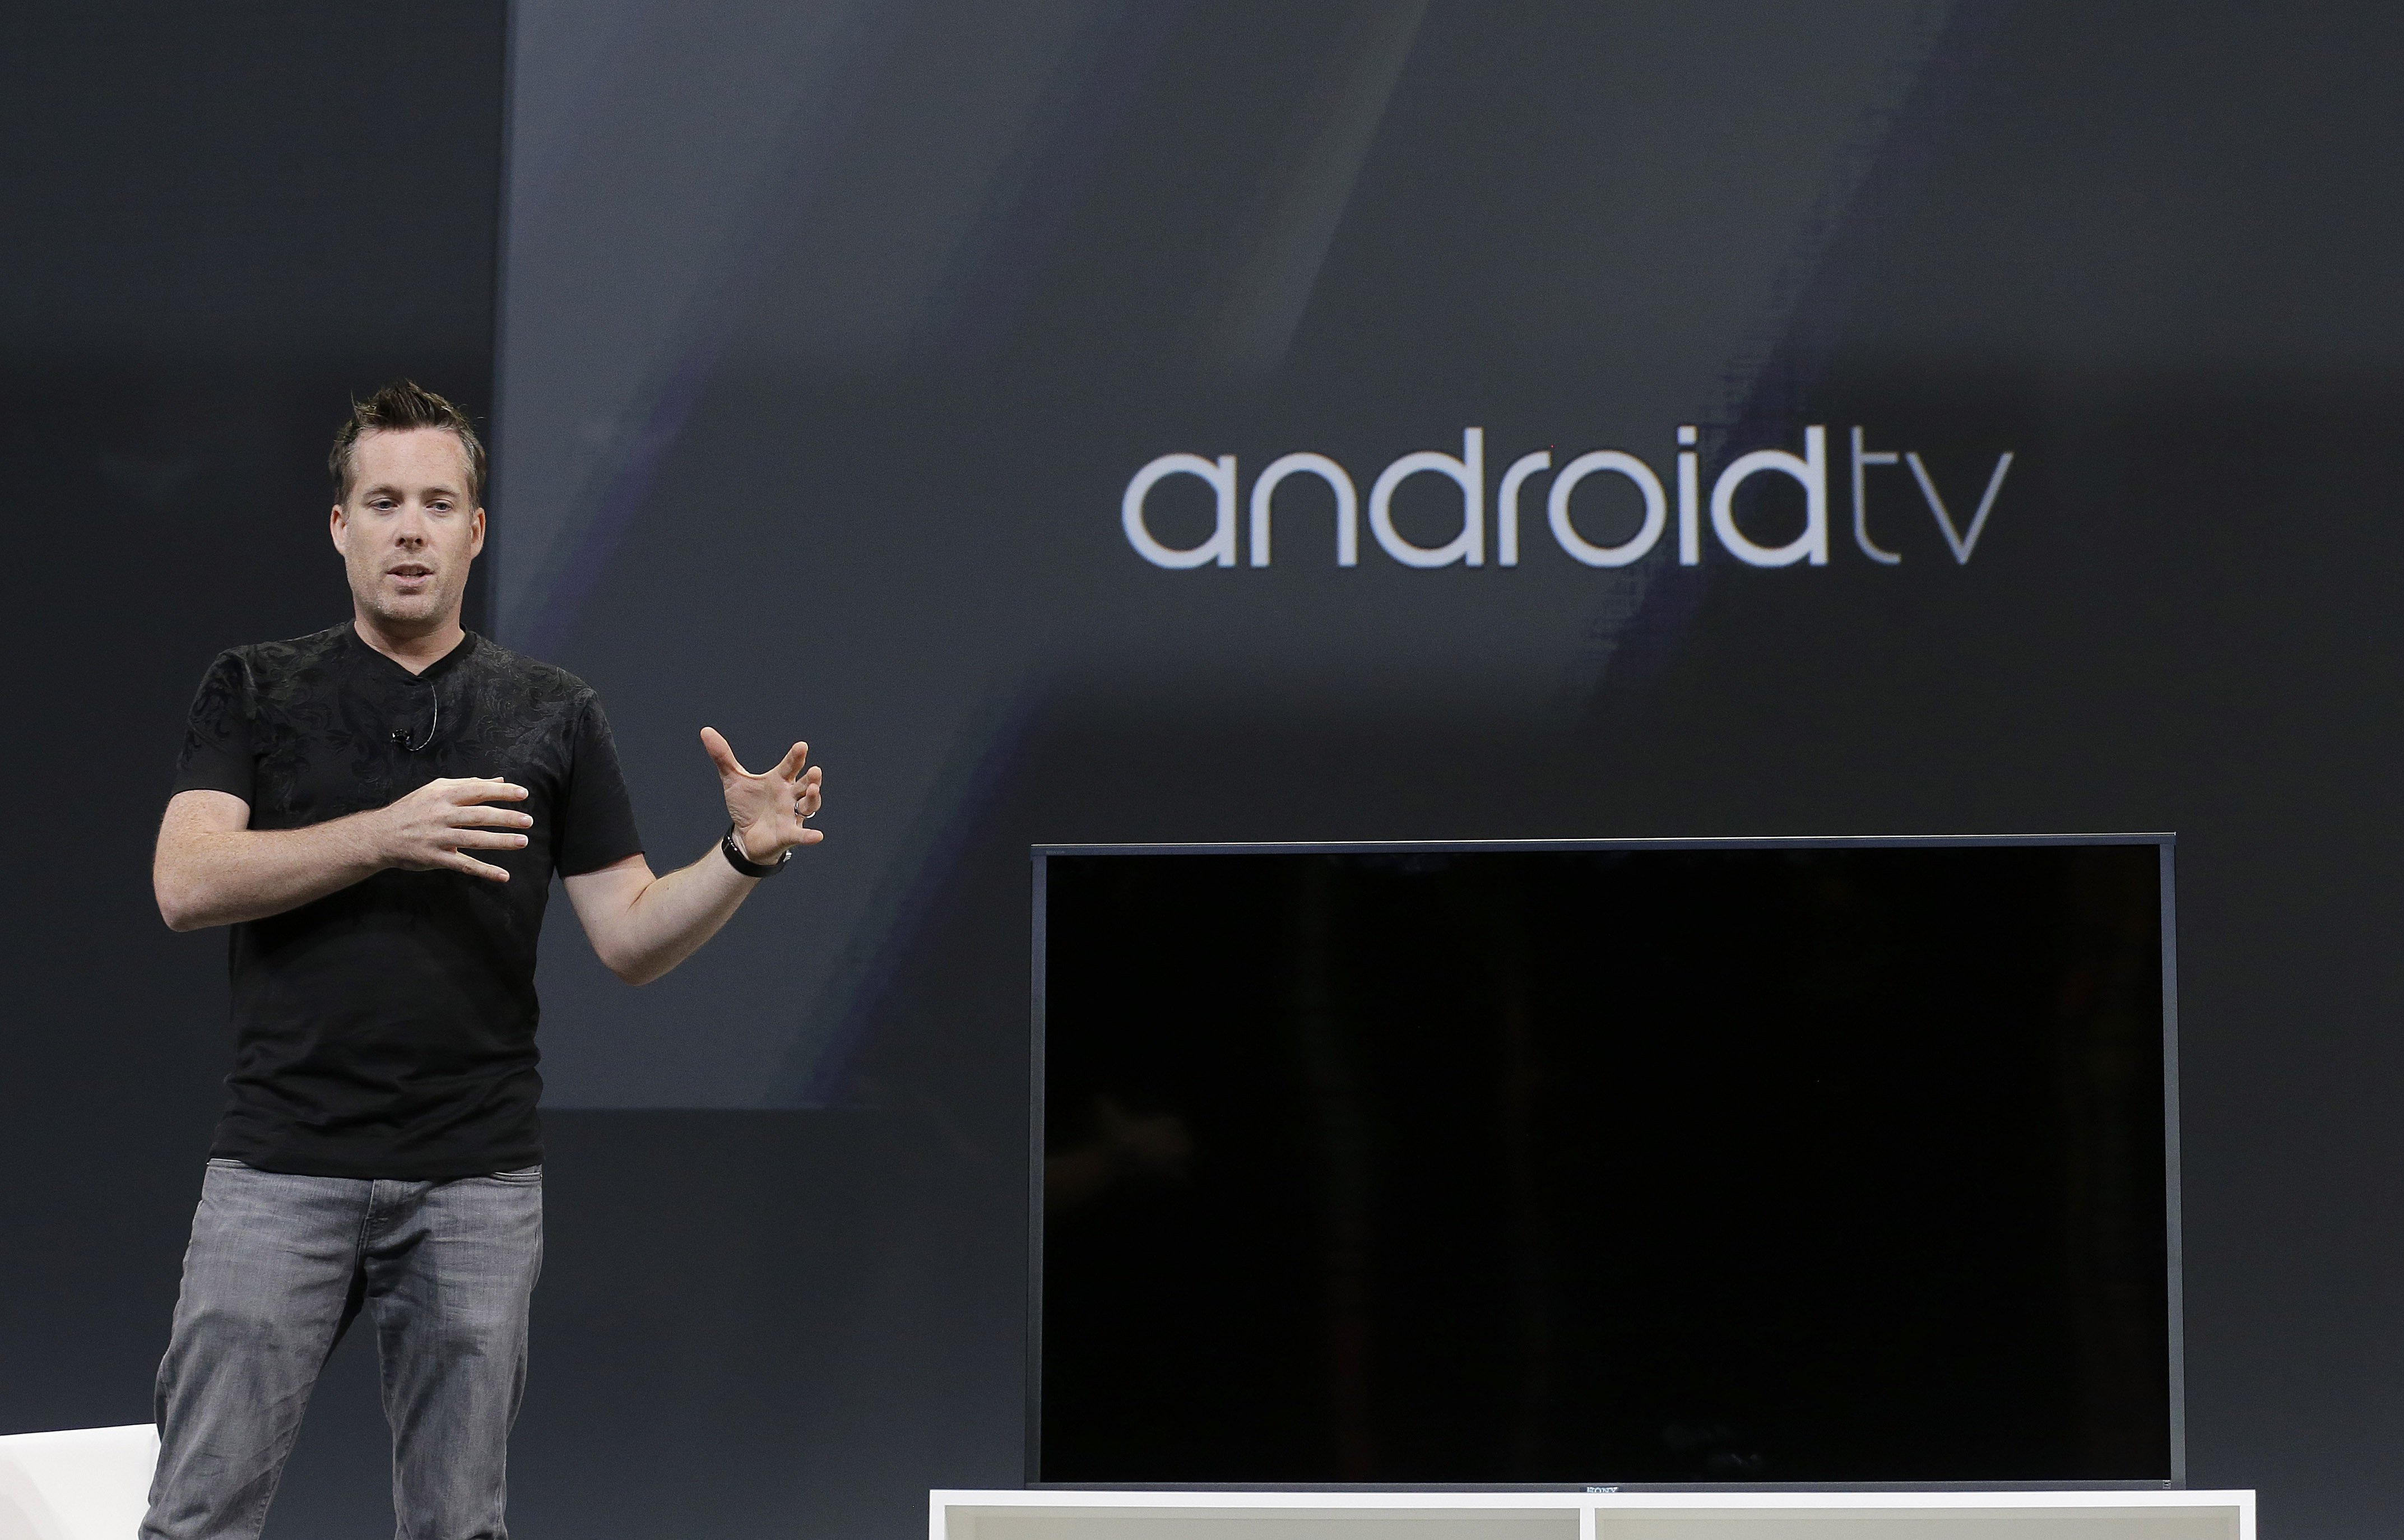 Dave Burke, director of engineering at Android, speaks about Android TV during the Google I/O 2014 keynote presentation in San Francisco on  June 25, 2014. 